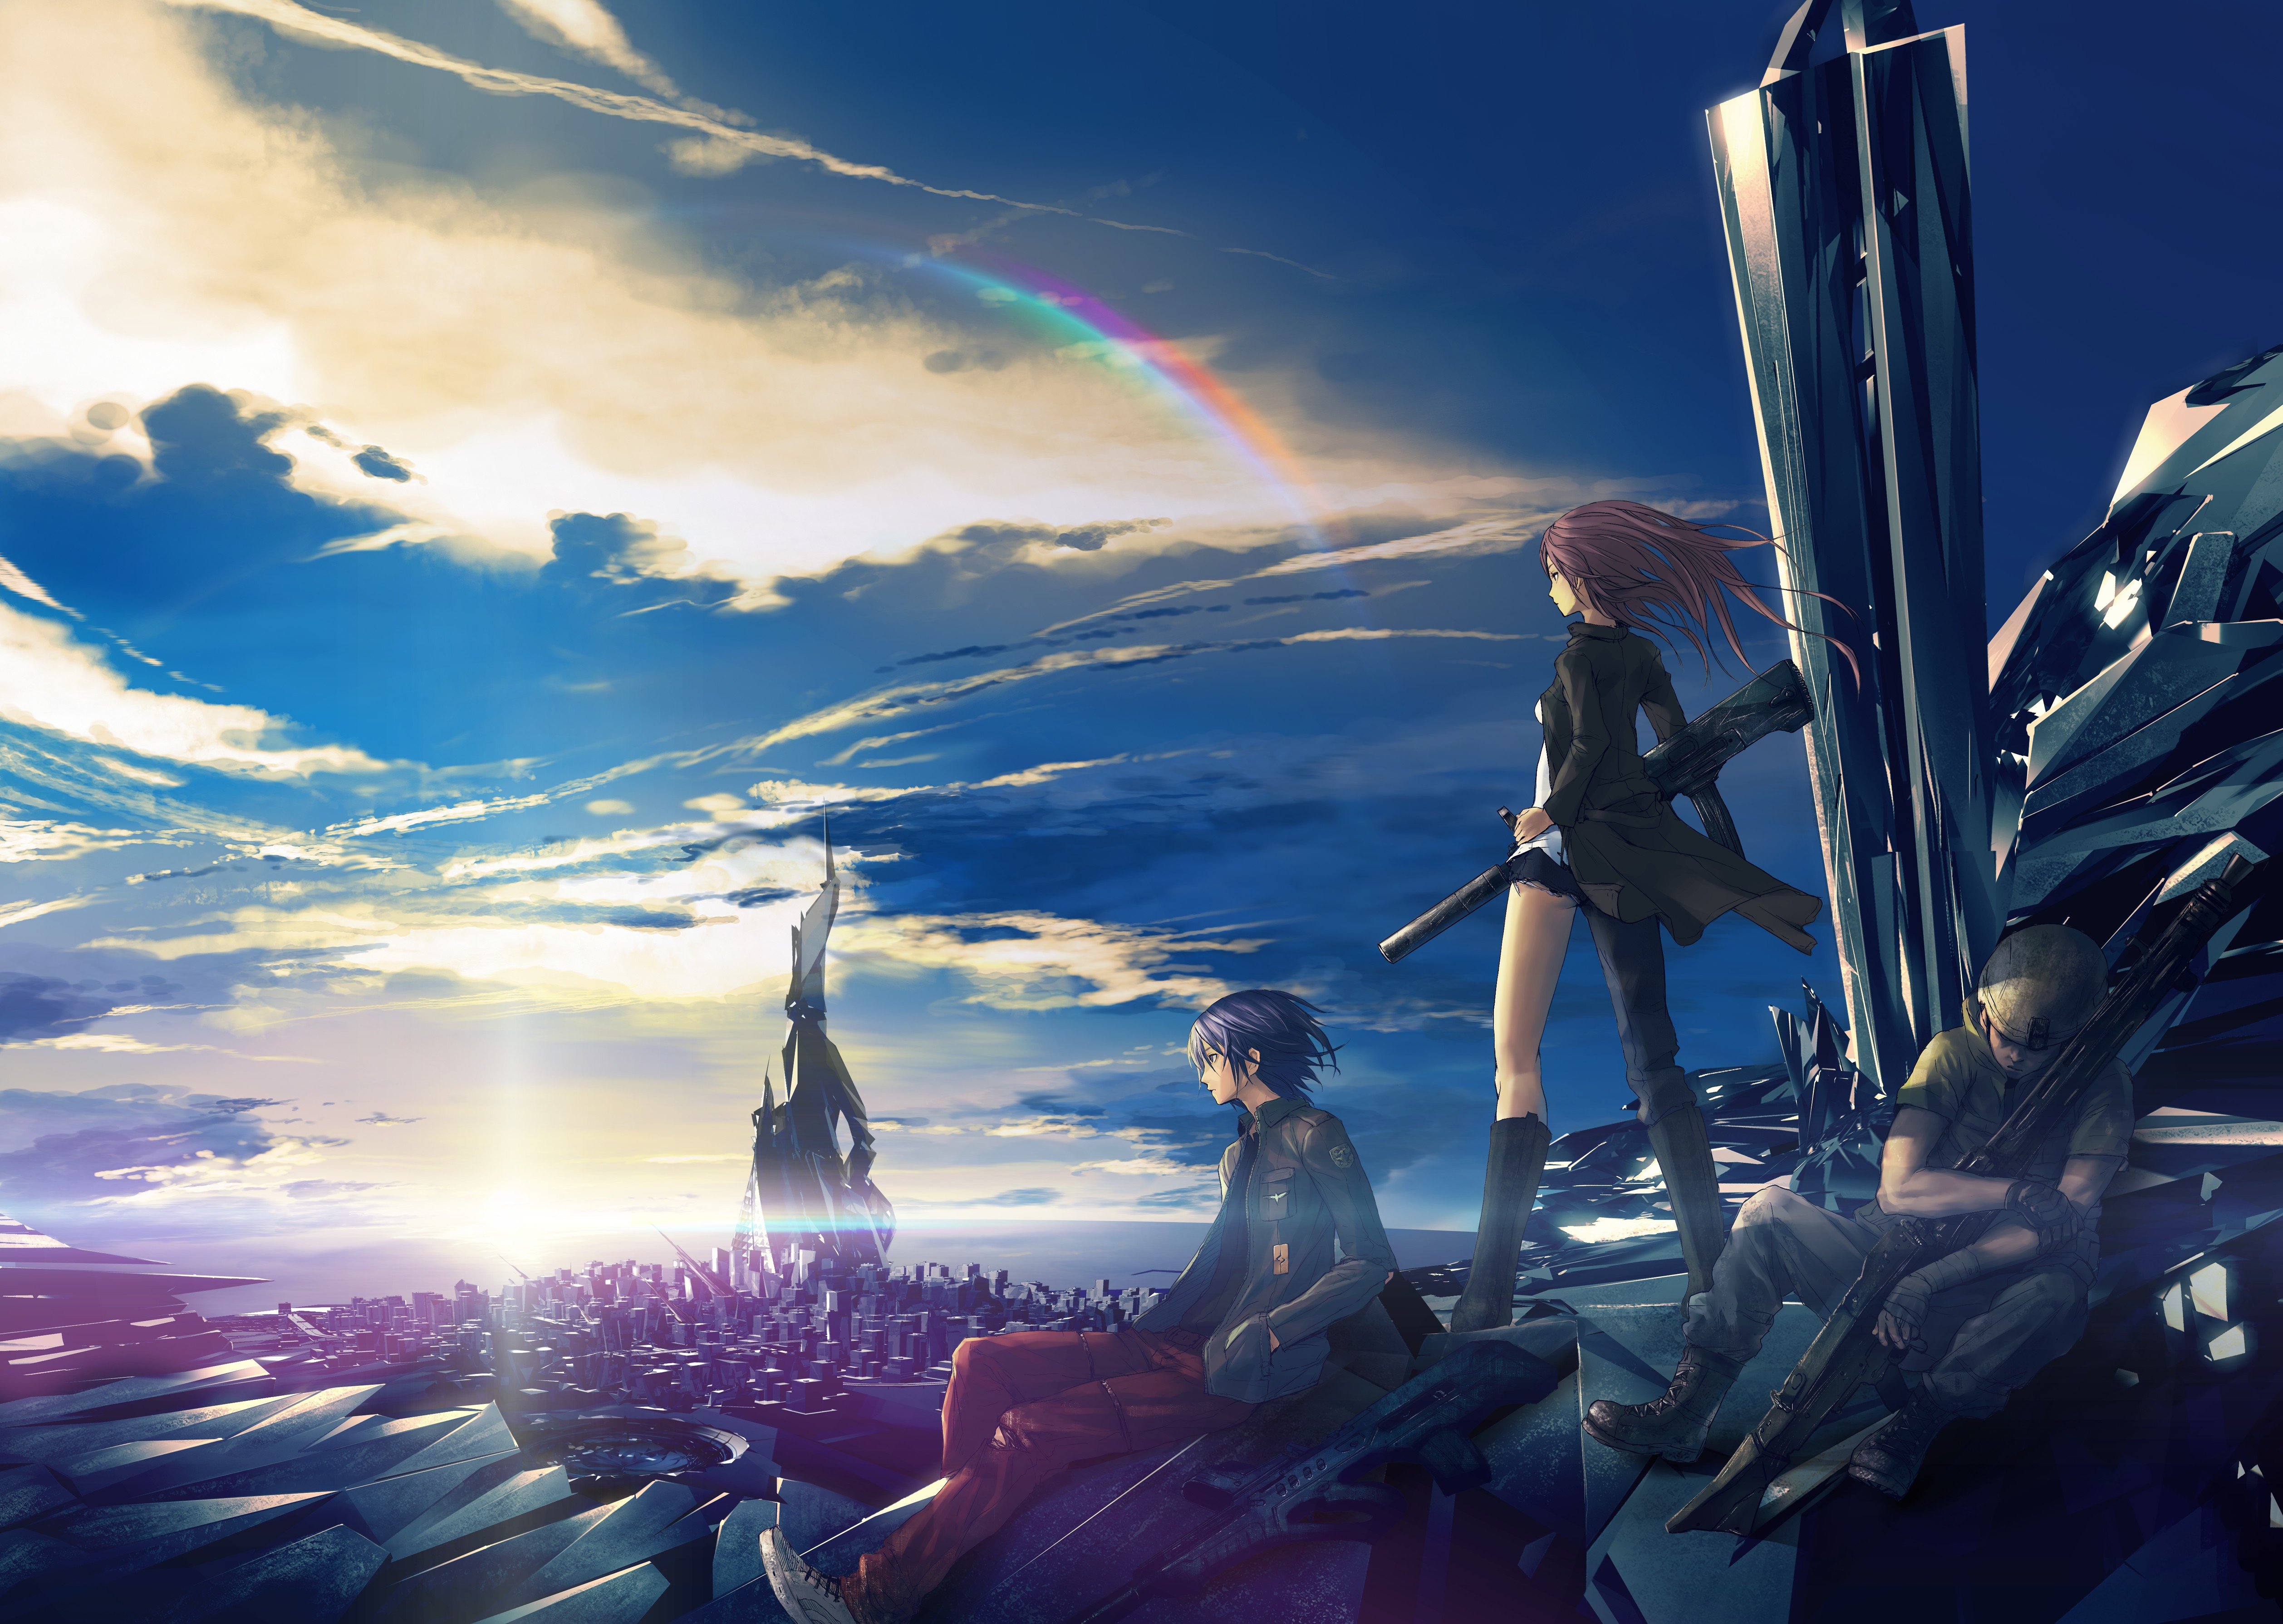 original characters, Weapon, Sky, Futuristic, Clouds, Rainbows, Anime Wallpaper